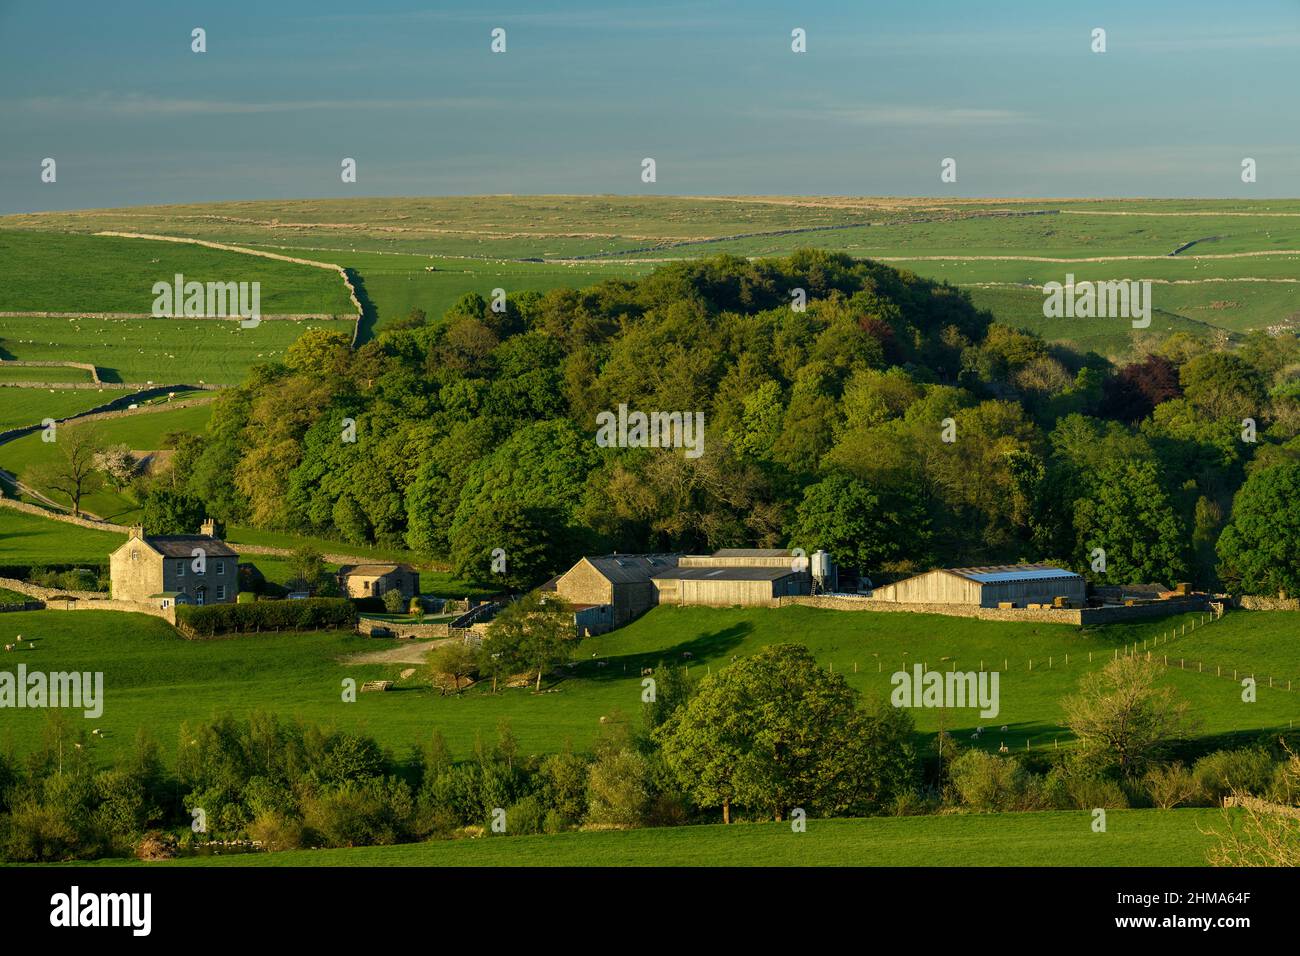 Old farmhouse & outbuildings in picturesque Yorkshire Dales countryside (rolling hills, sheep in fields, dry-stone walls) - Burnsall, England UK. Stock Photo